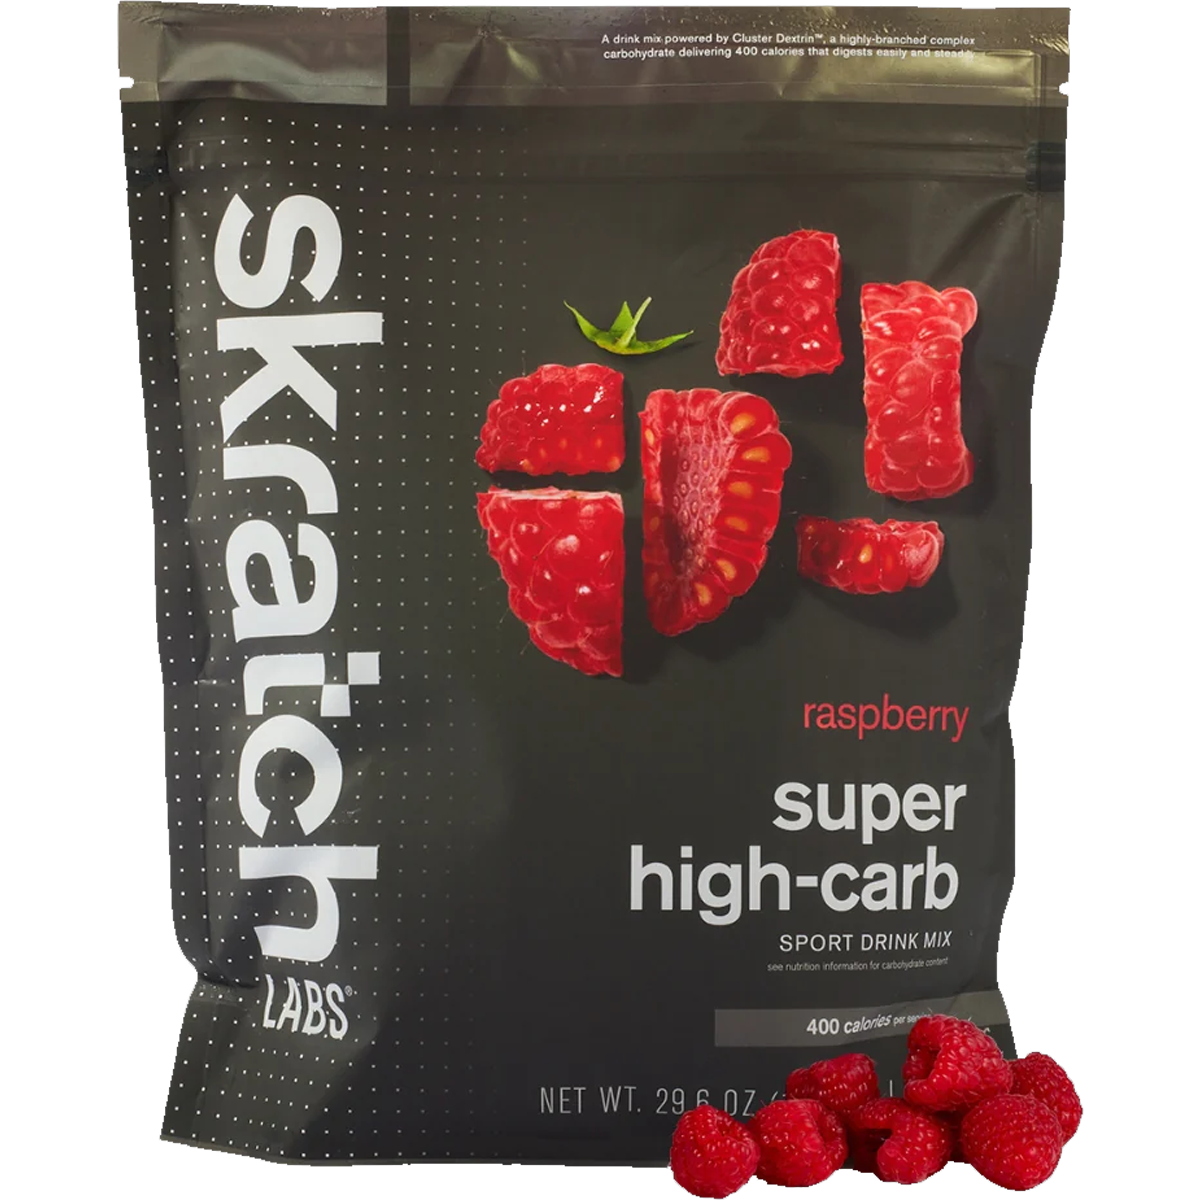 Super High-Carb Drink Mix (8 Servings) alternate view